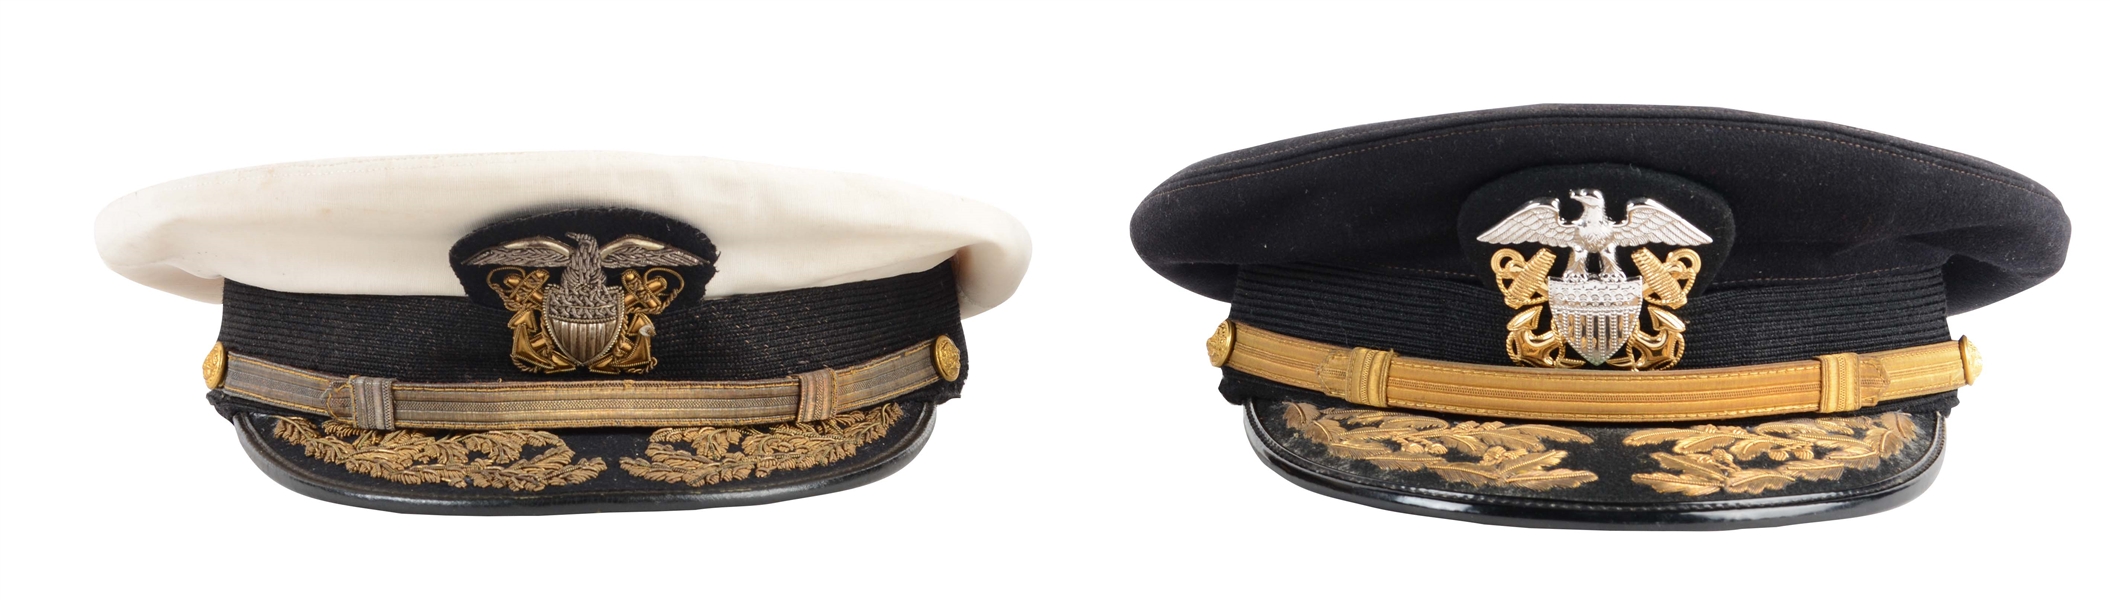 LOT OF 2: U.S. NAVY ADMIRALS CAPS WORN BY ADMIRAL PAUL PIHL & ADMIRAL HENRY ECCLES.